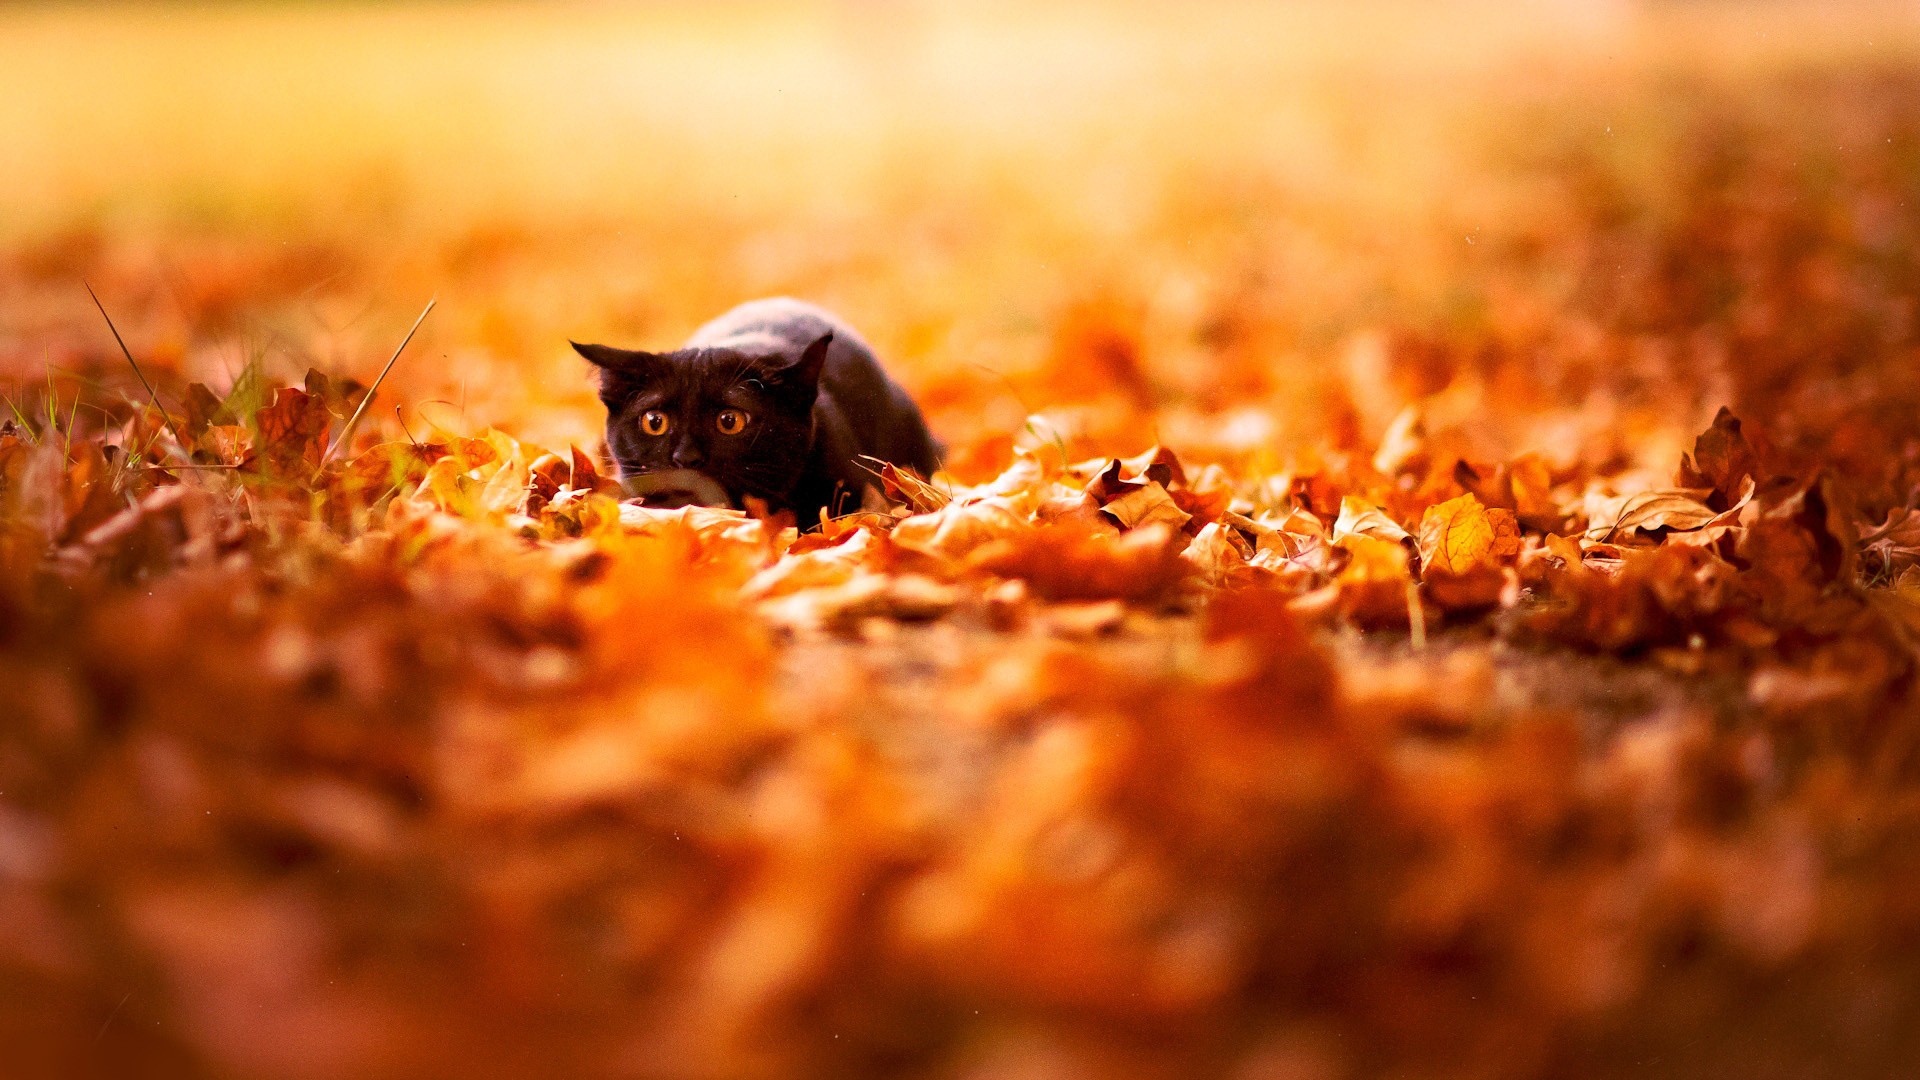 General 1920x1080 feline depth of field cats nature leaves fall animals black cats fallen leaves